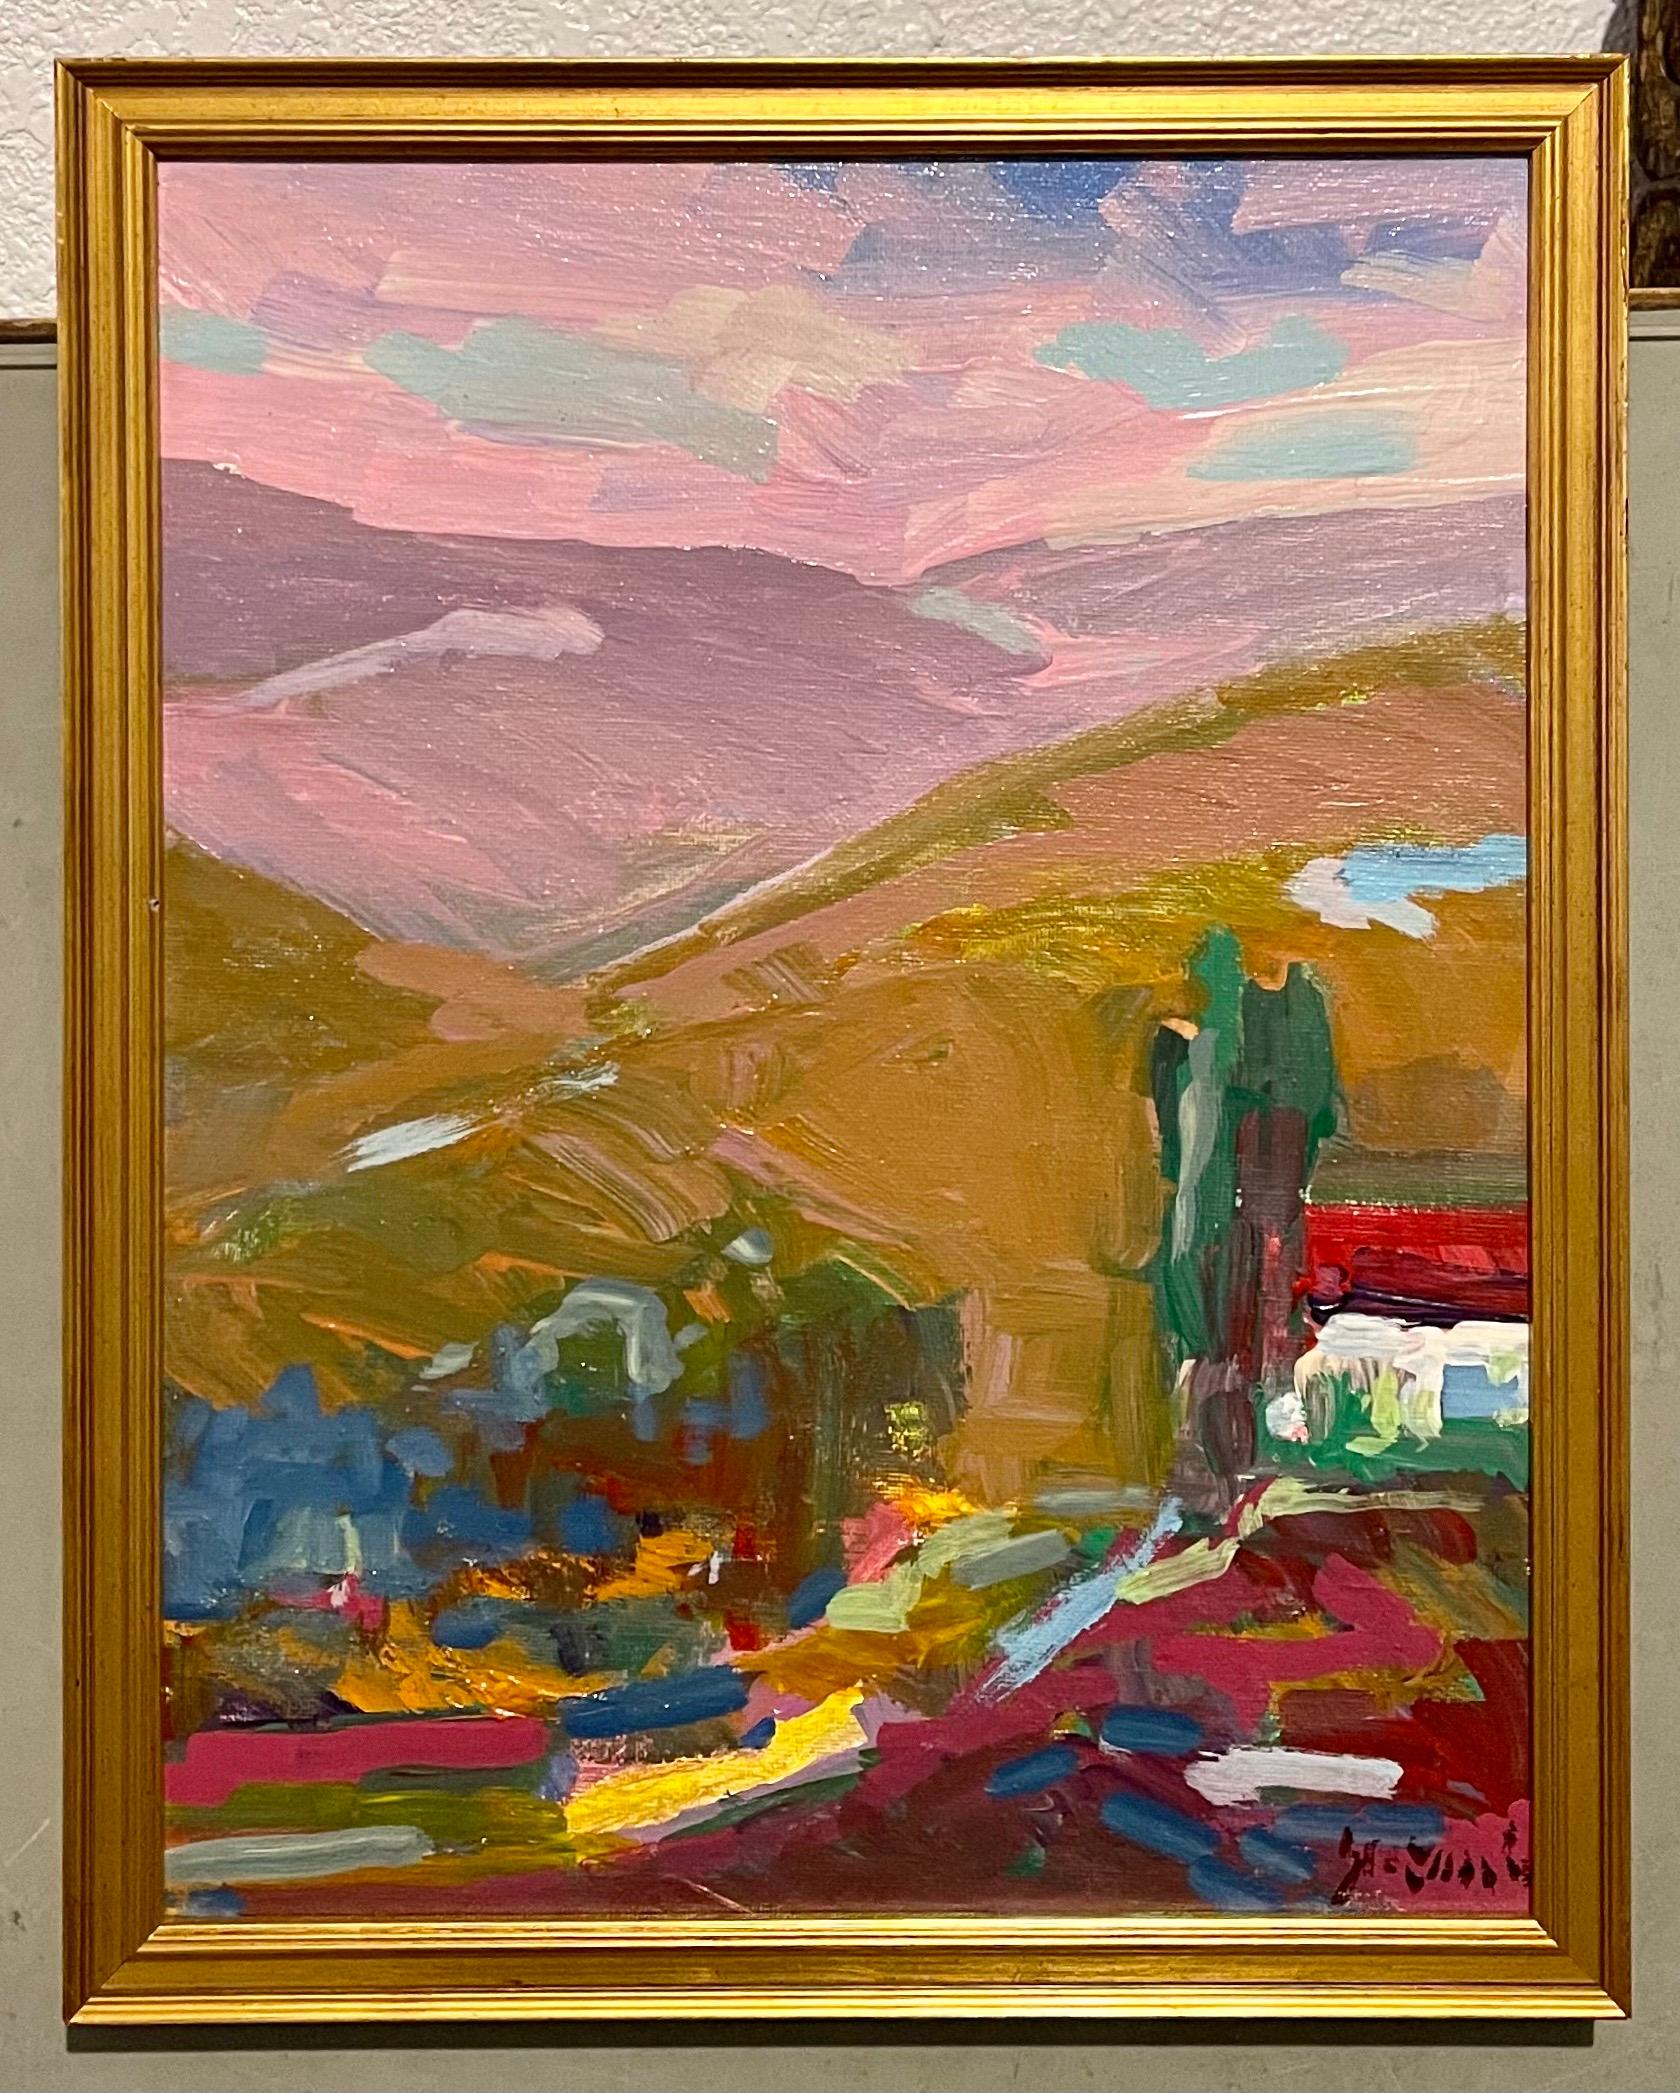 A beautiful, luminous landscape painting.
I believe this is oil paint. It might be acrylic.
15X12 with frame.  13.5 X 10.5 sight.

Juan Guzman-Maldonado is a Chilean Postwar & Contemporary painter who was born in 1948.
He moved to California in